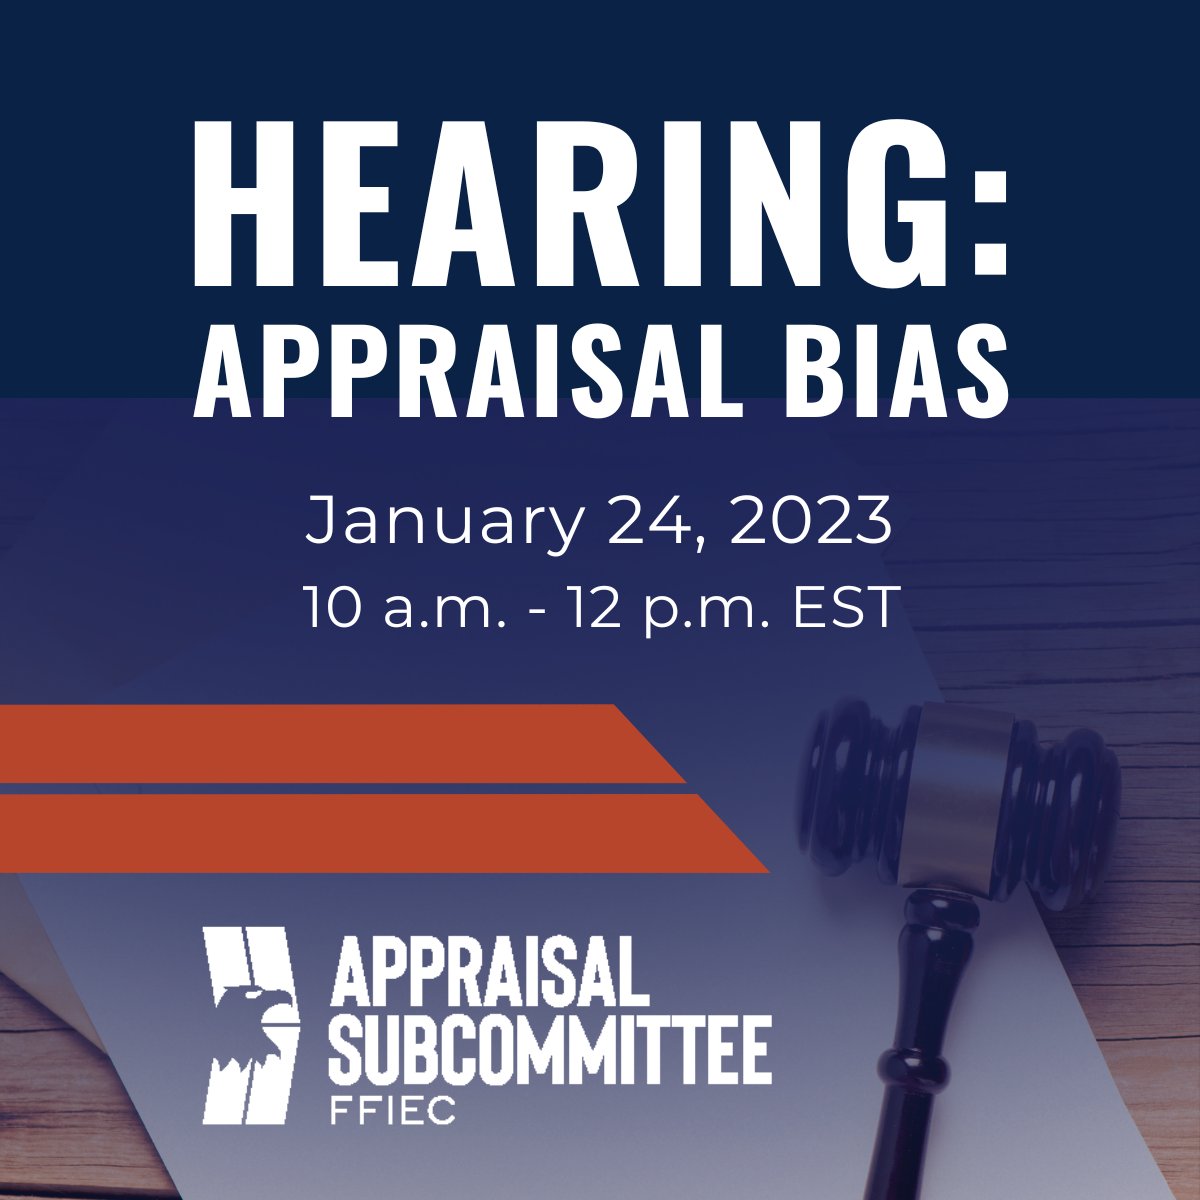 Save the Date! Join the Appraisal Subcommittee on January 24, 2023 from 10 a.m. to 12 p.m. EST for a Hearing on Appraisal Bias. Mark your calendars and make plans to tune into this important event. asc.gov/node/266053 #ASCgov #AppraisalBias